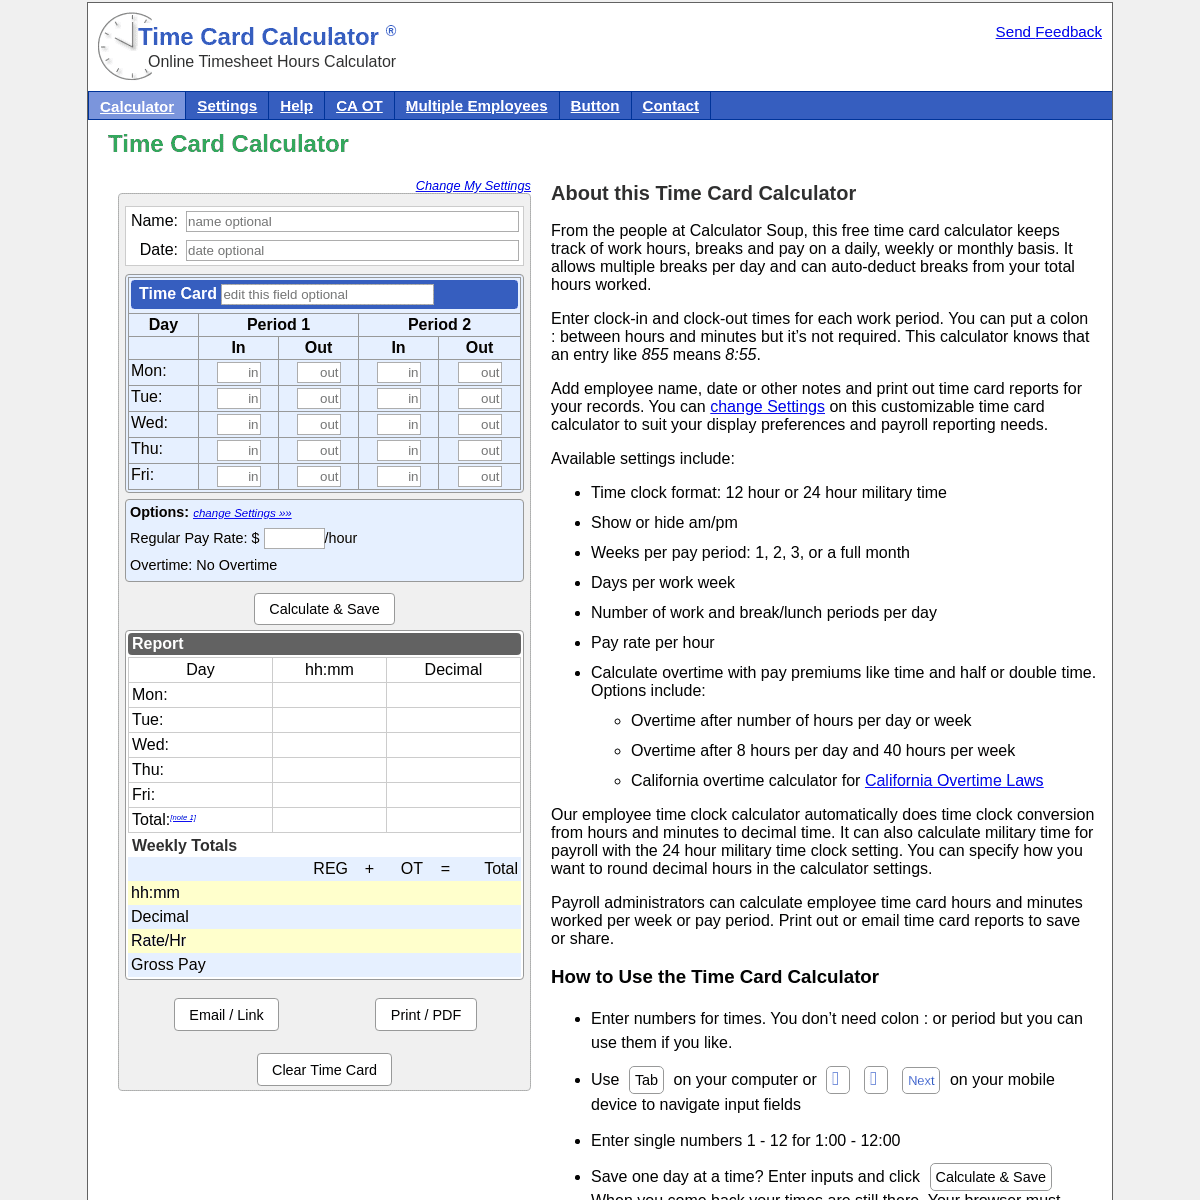 A complete backup of timecardcalculator.net